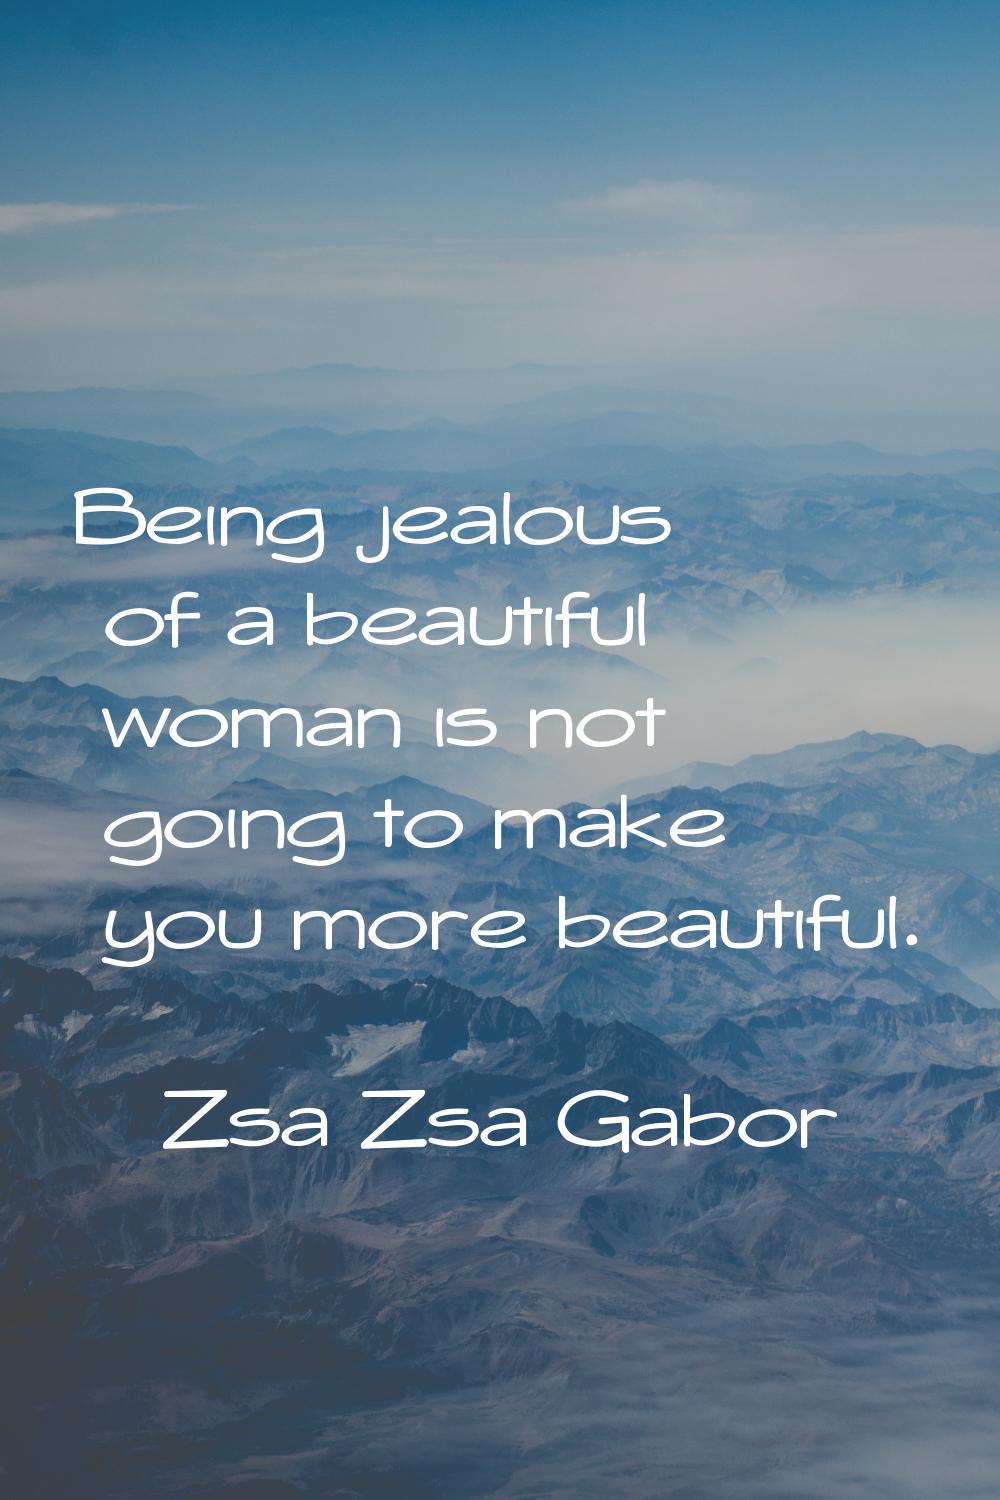 Being jealous of a beautiful woman is not going to make you more beautiful.